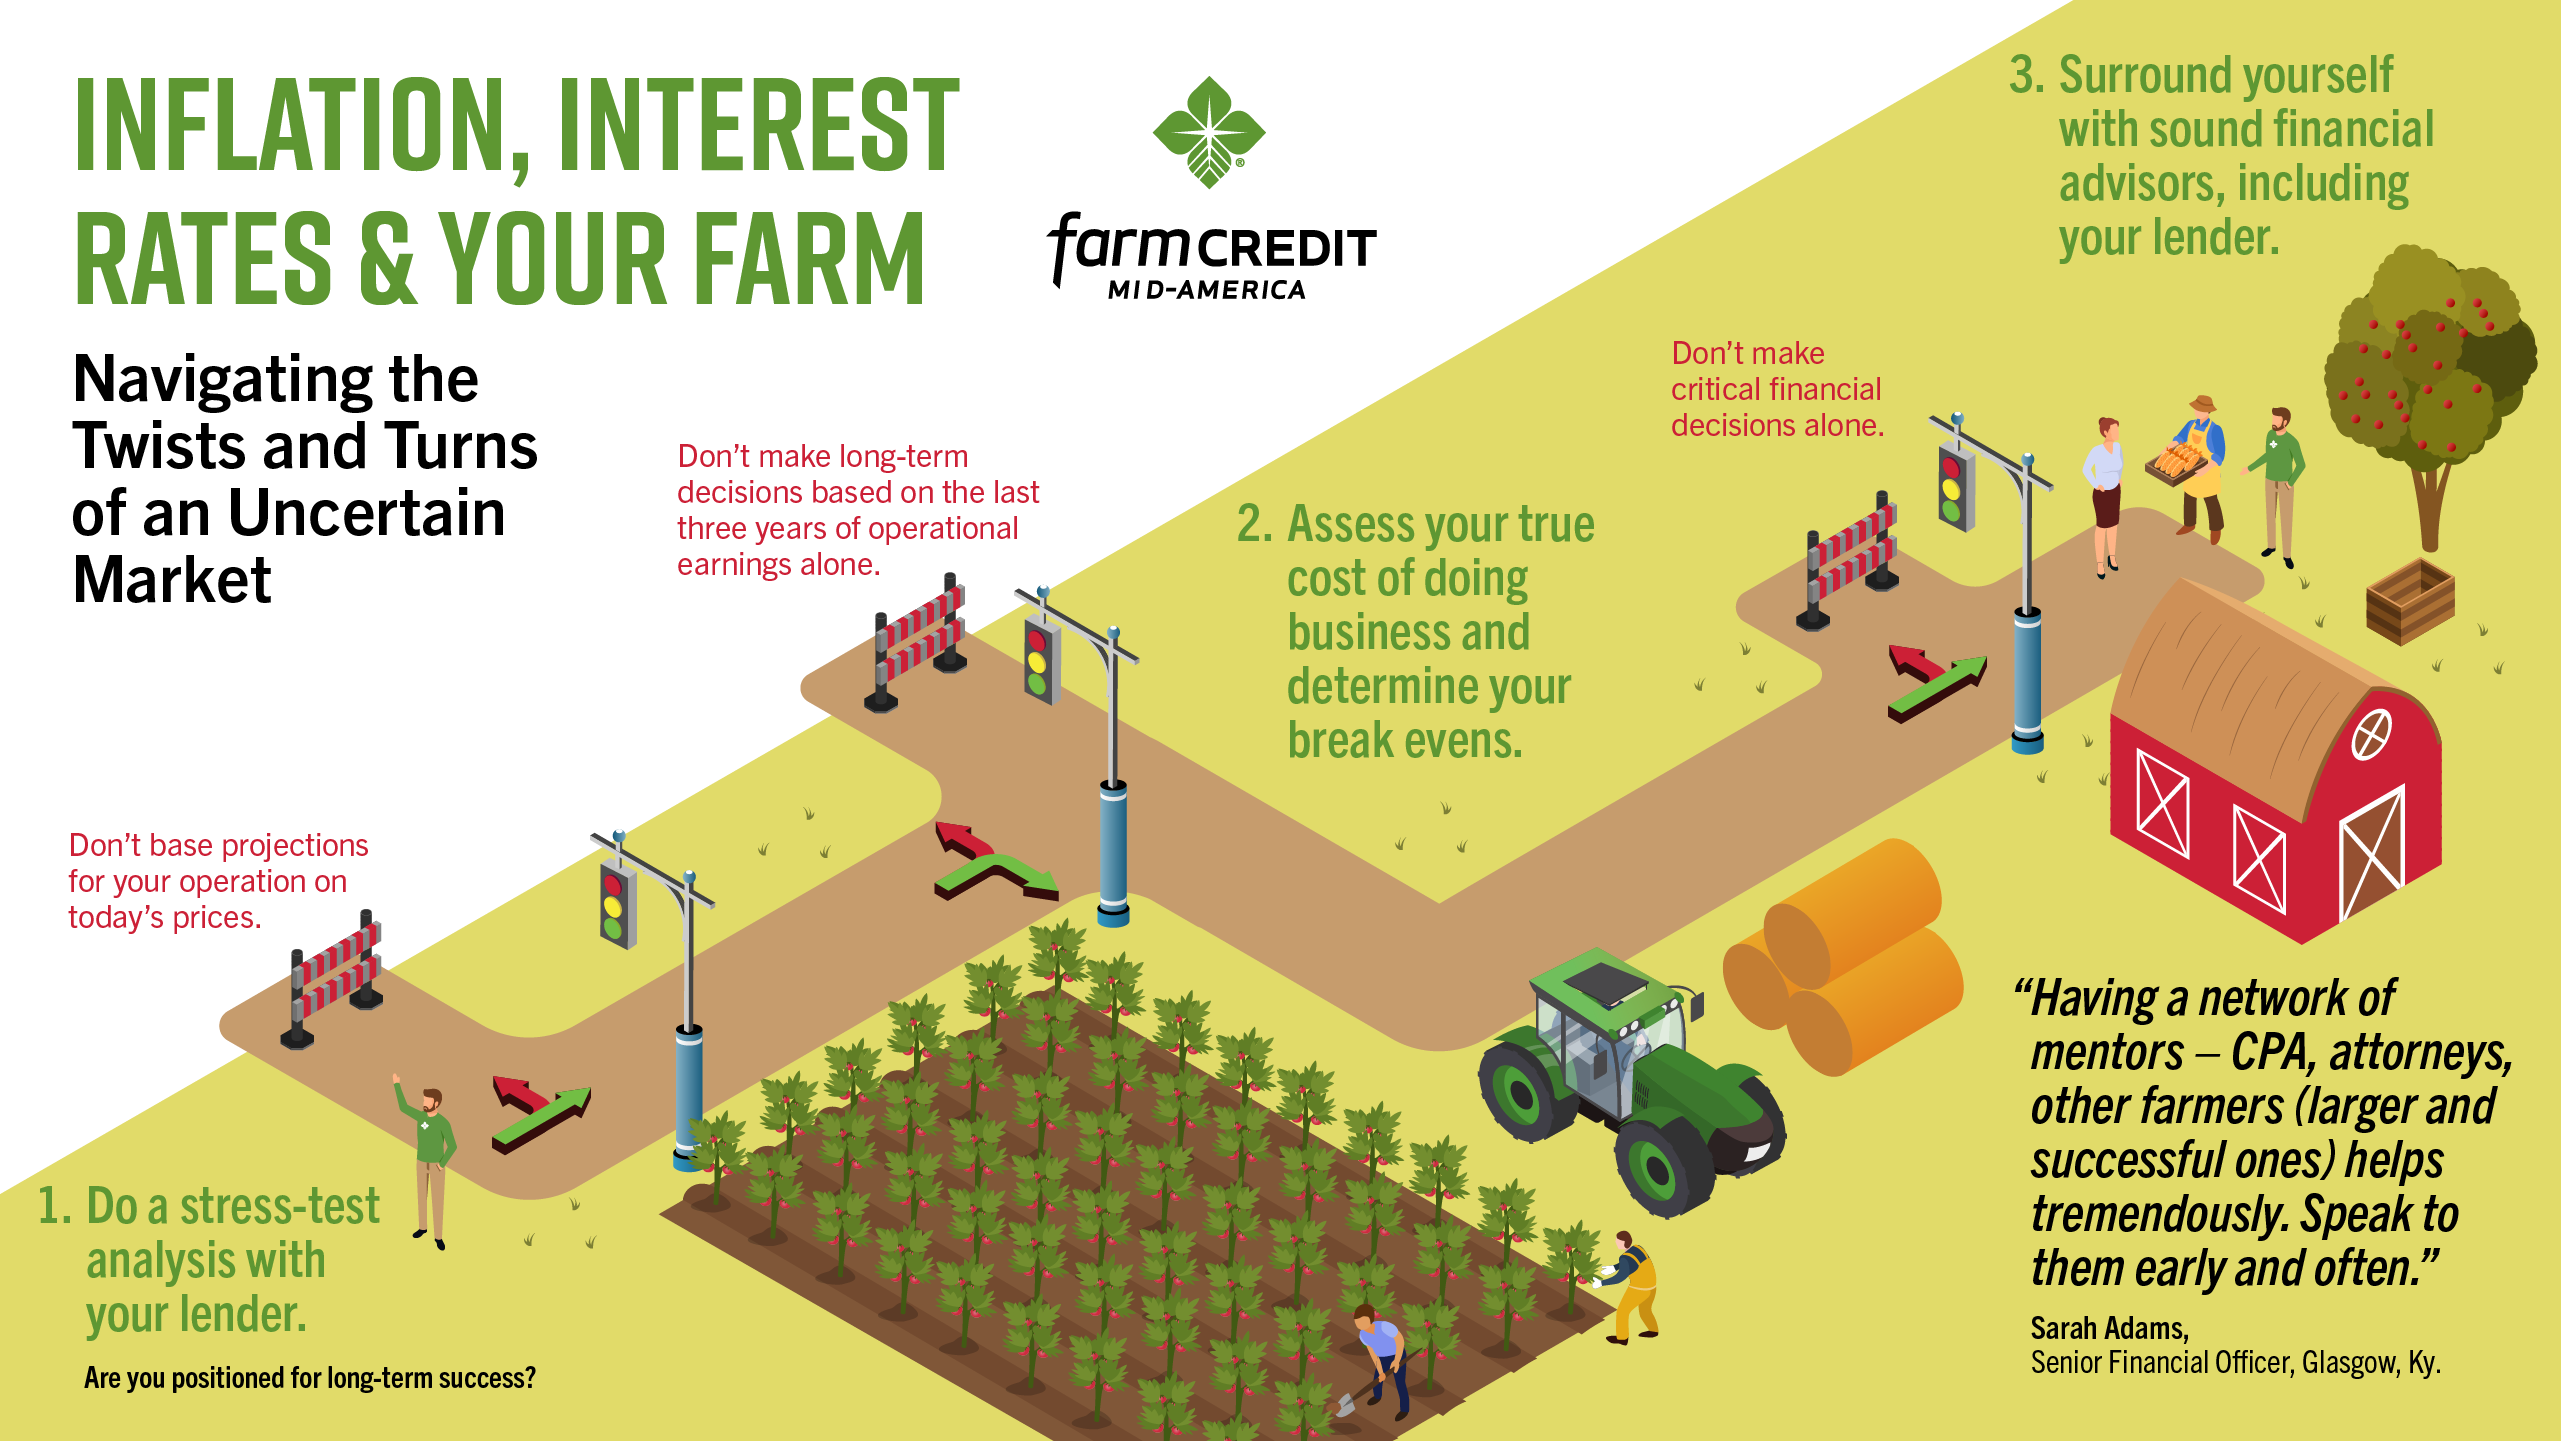 Infographic about inflation, interest rates and your farm webinar